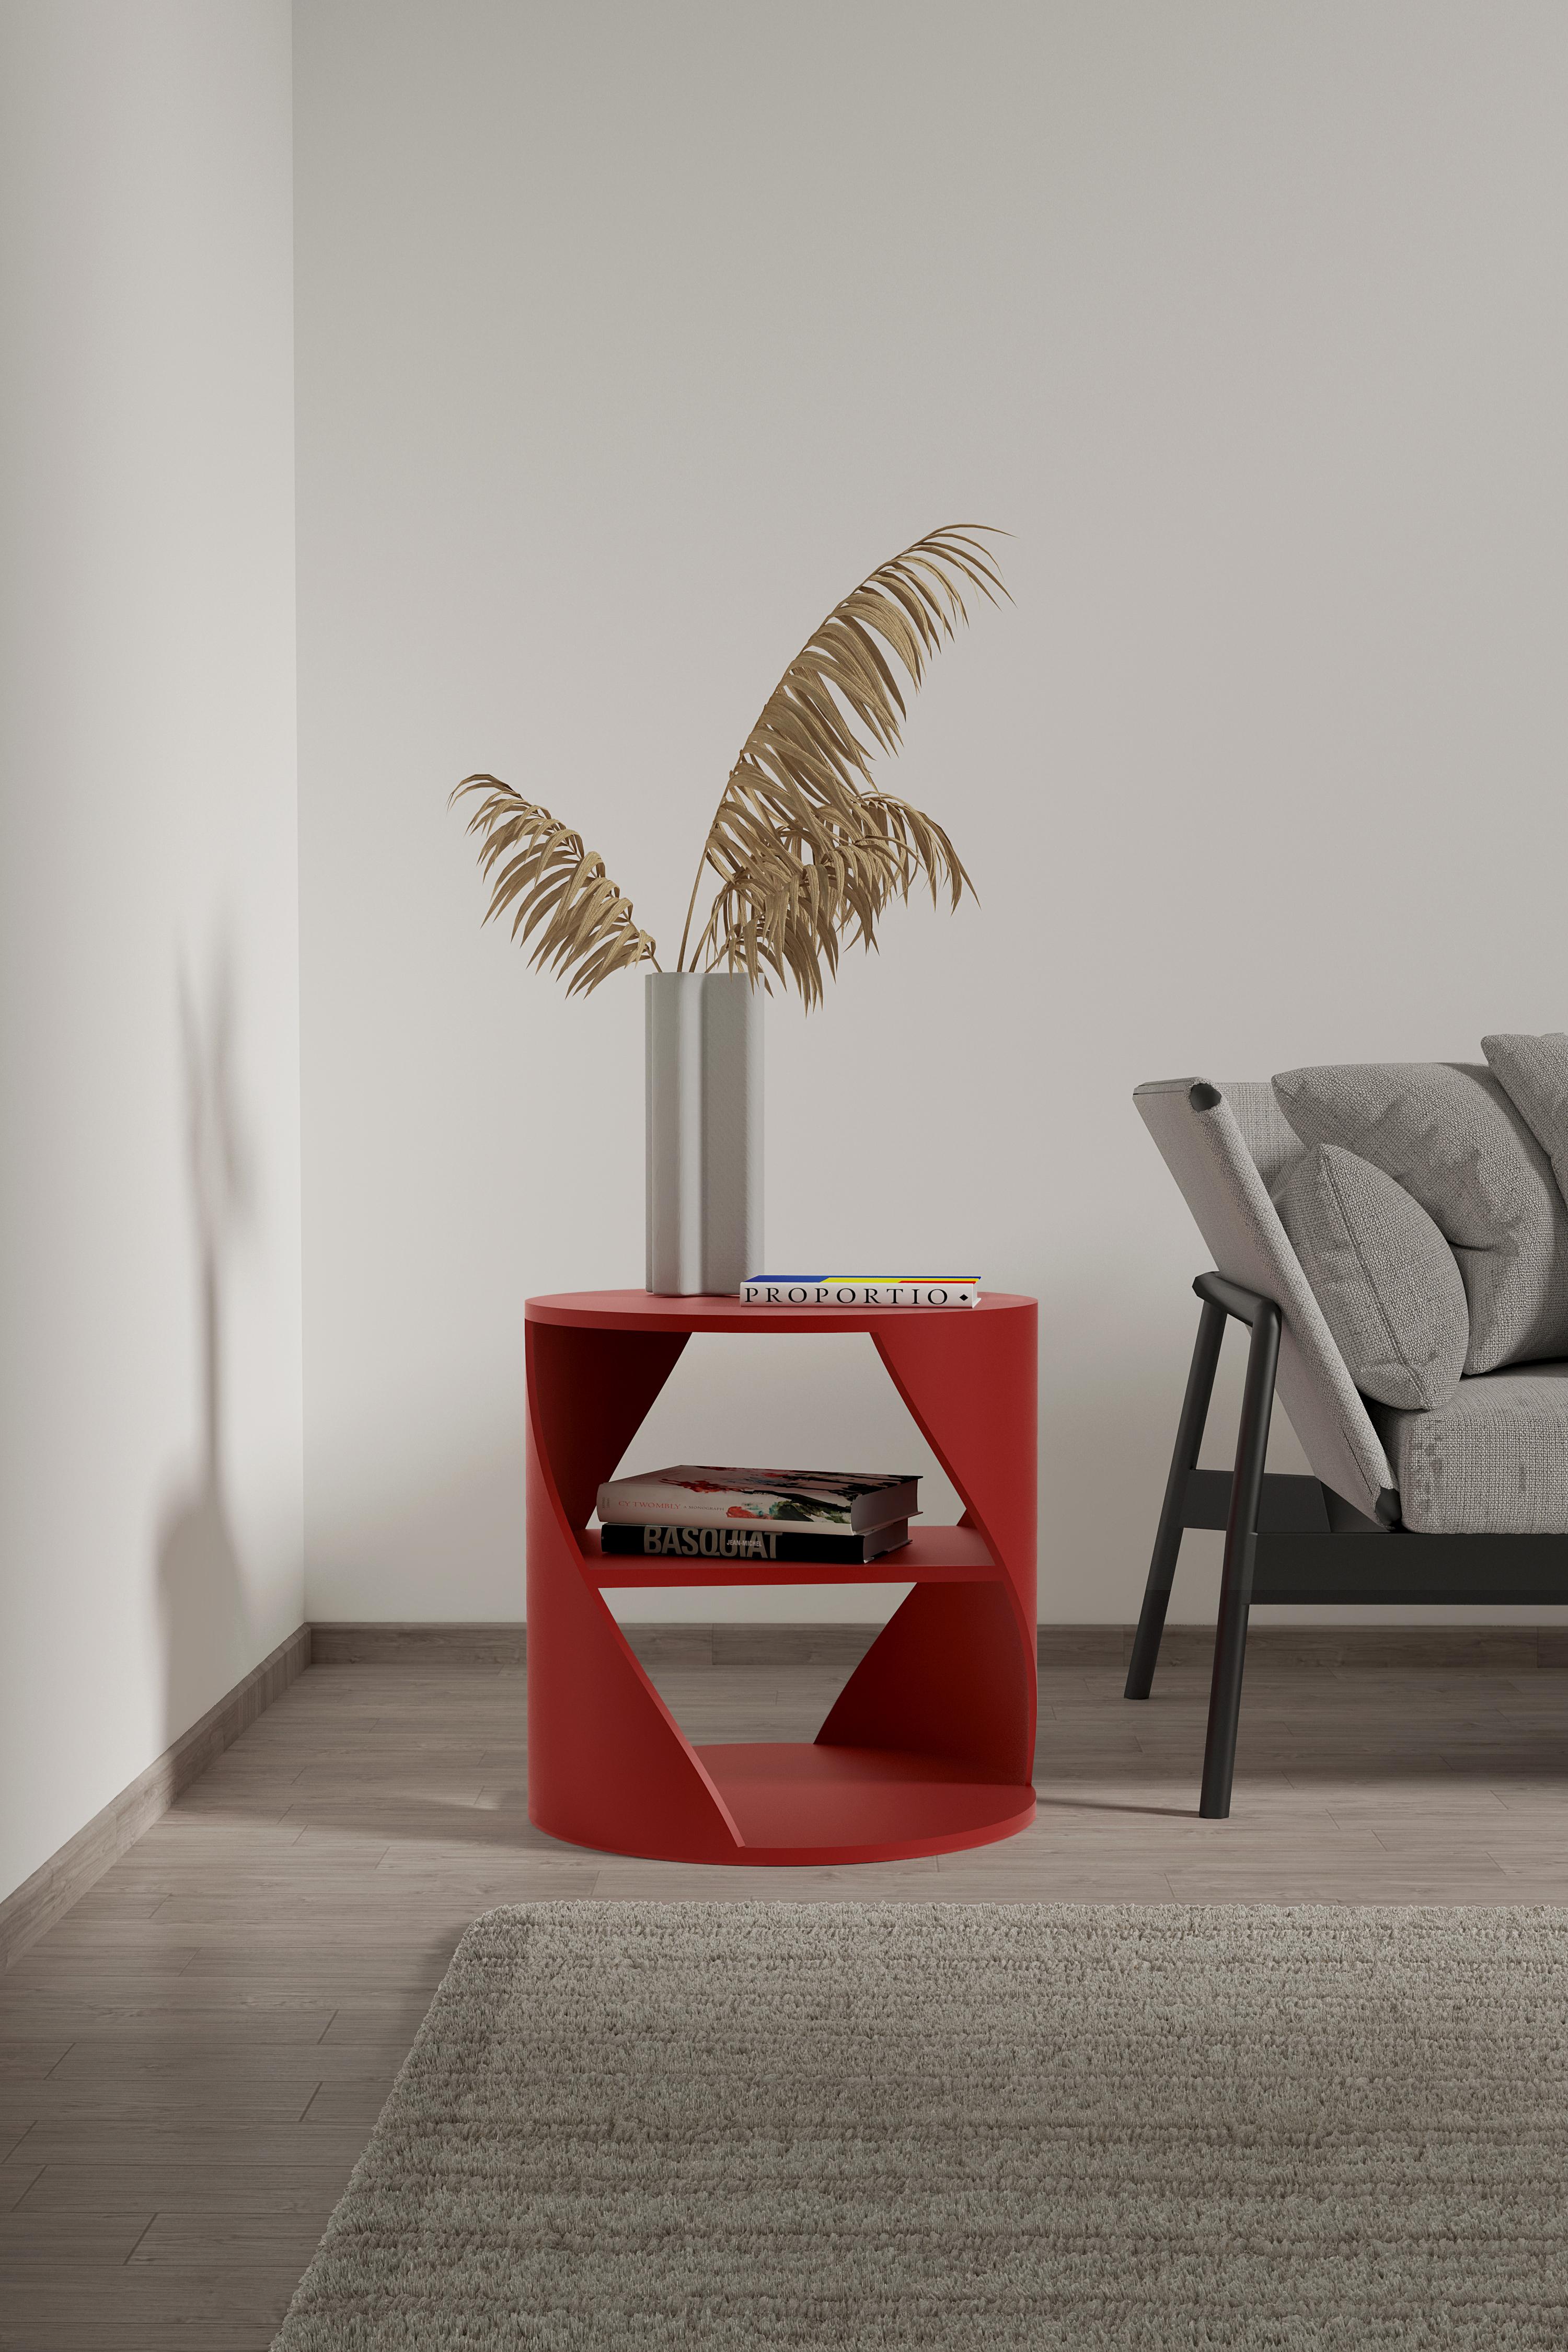 Set of two Red Decorative Nightstand, MYDNA Side Table by Joel Escalona
MYDNA is a chic and contemporary storage system inspired by the DNA concept: both by its sophisticated double helix shape, and by the metaphorical statement that everything you